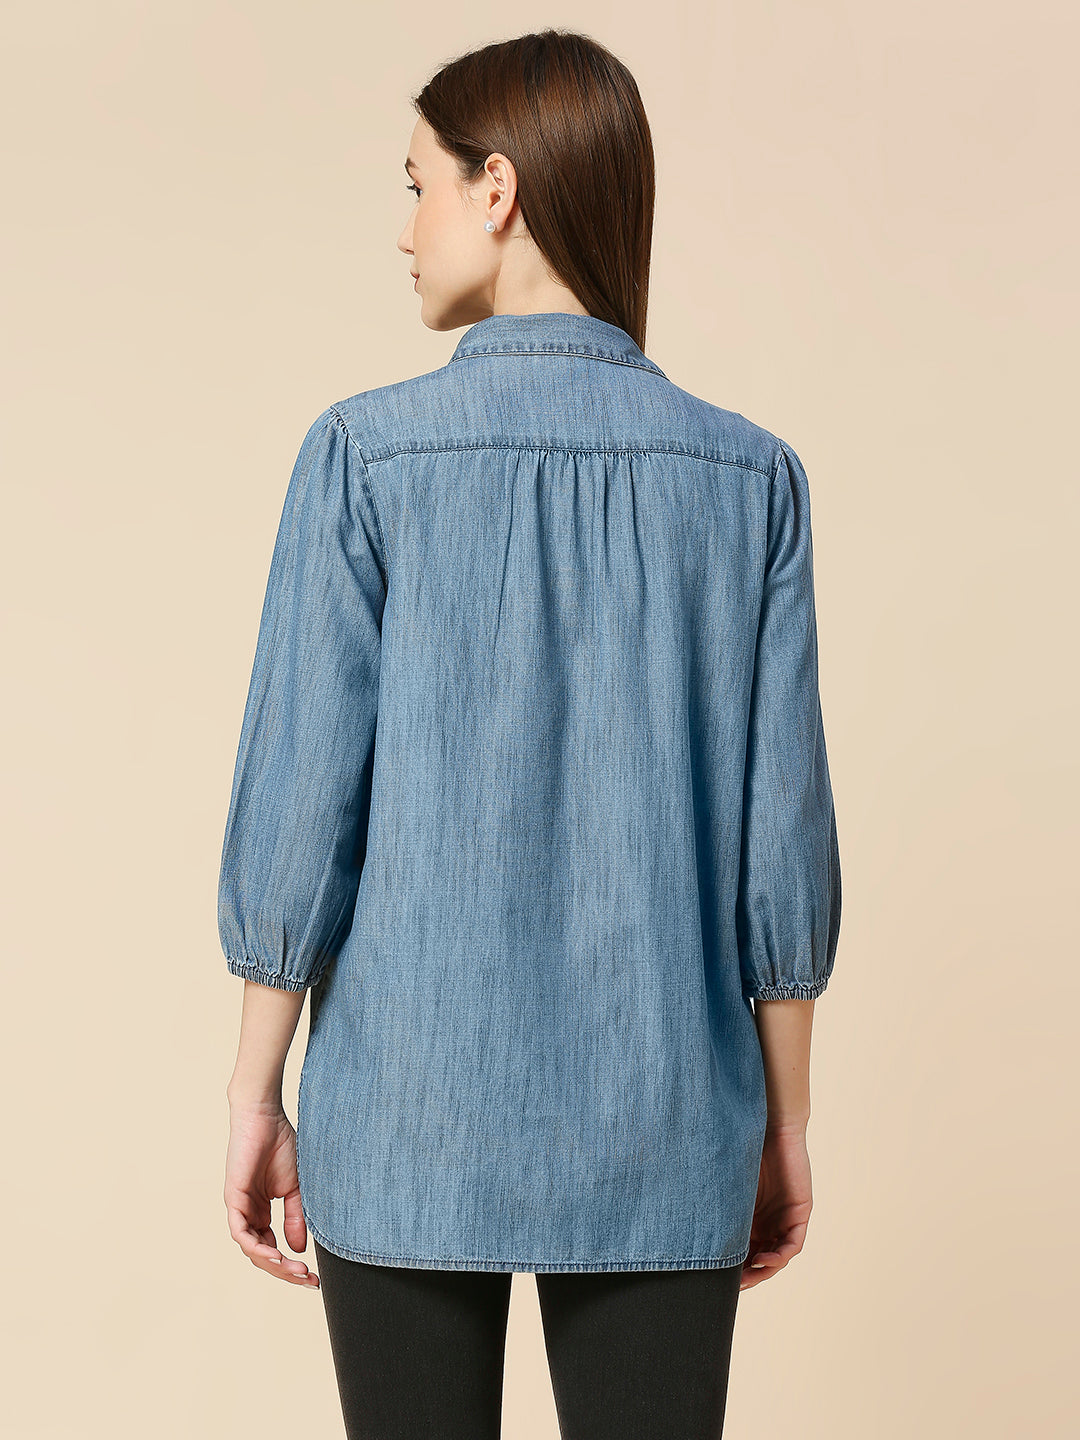 MID WASH DENIM LONGLINE SHIRT WITH INTRICATE LACE LIKE EMBROIDERY